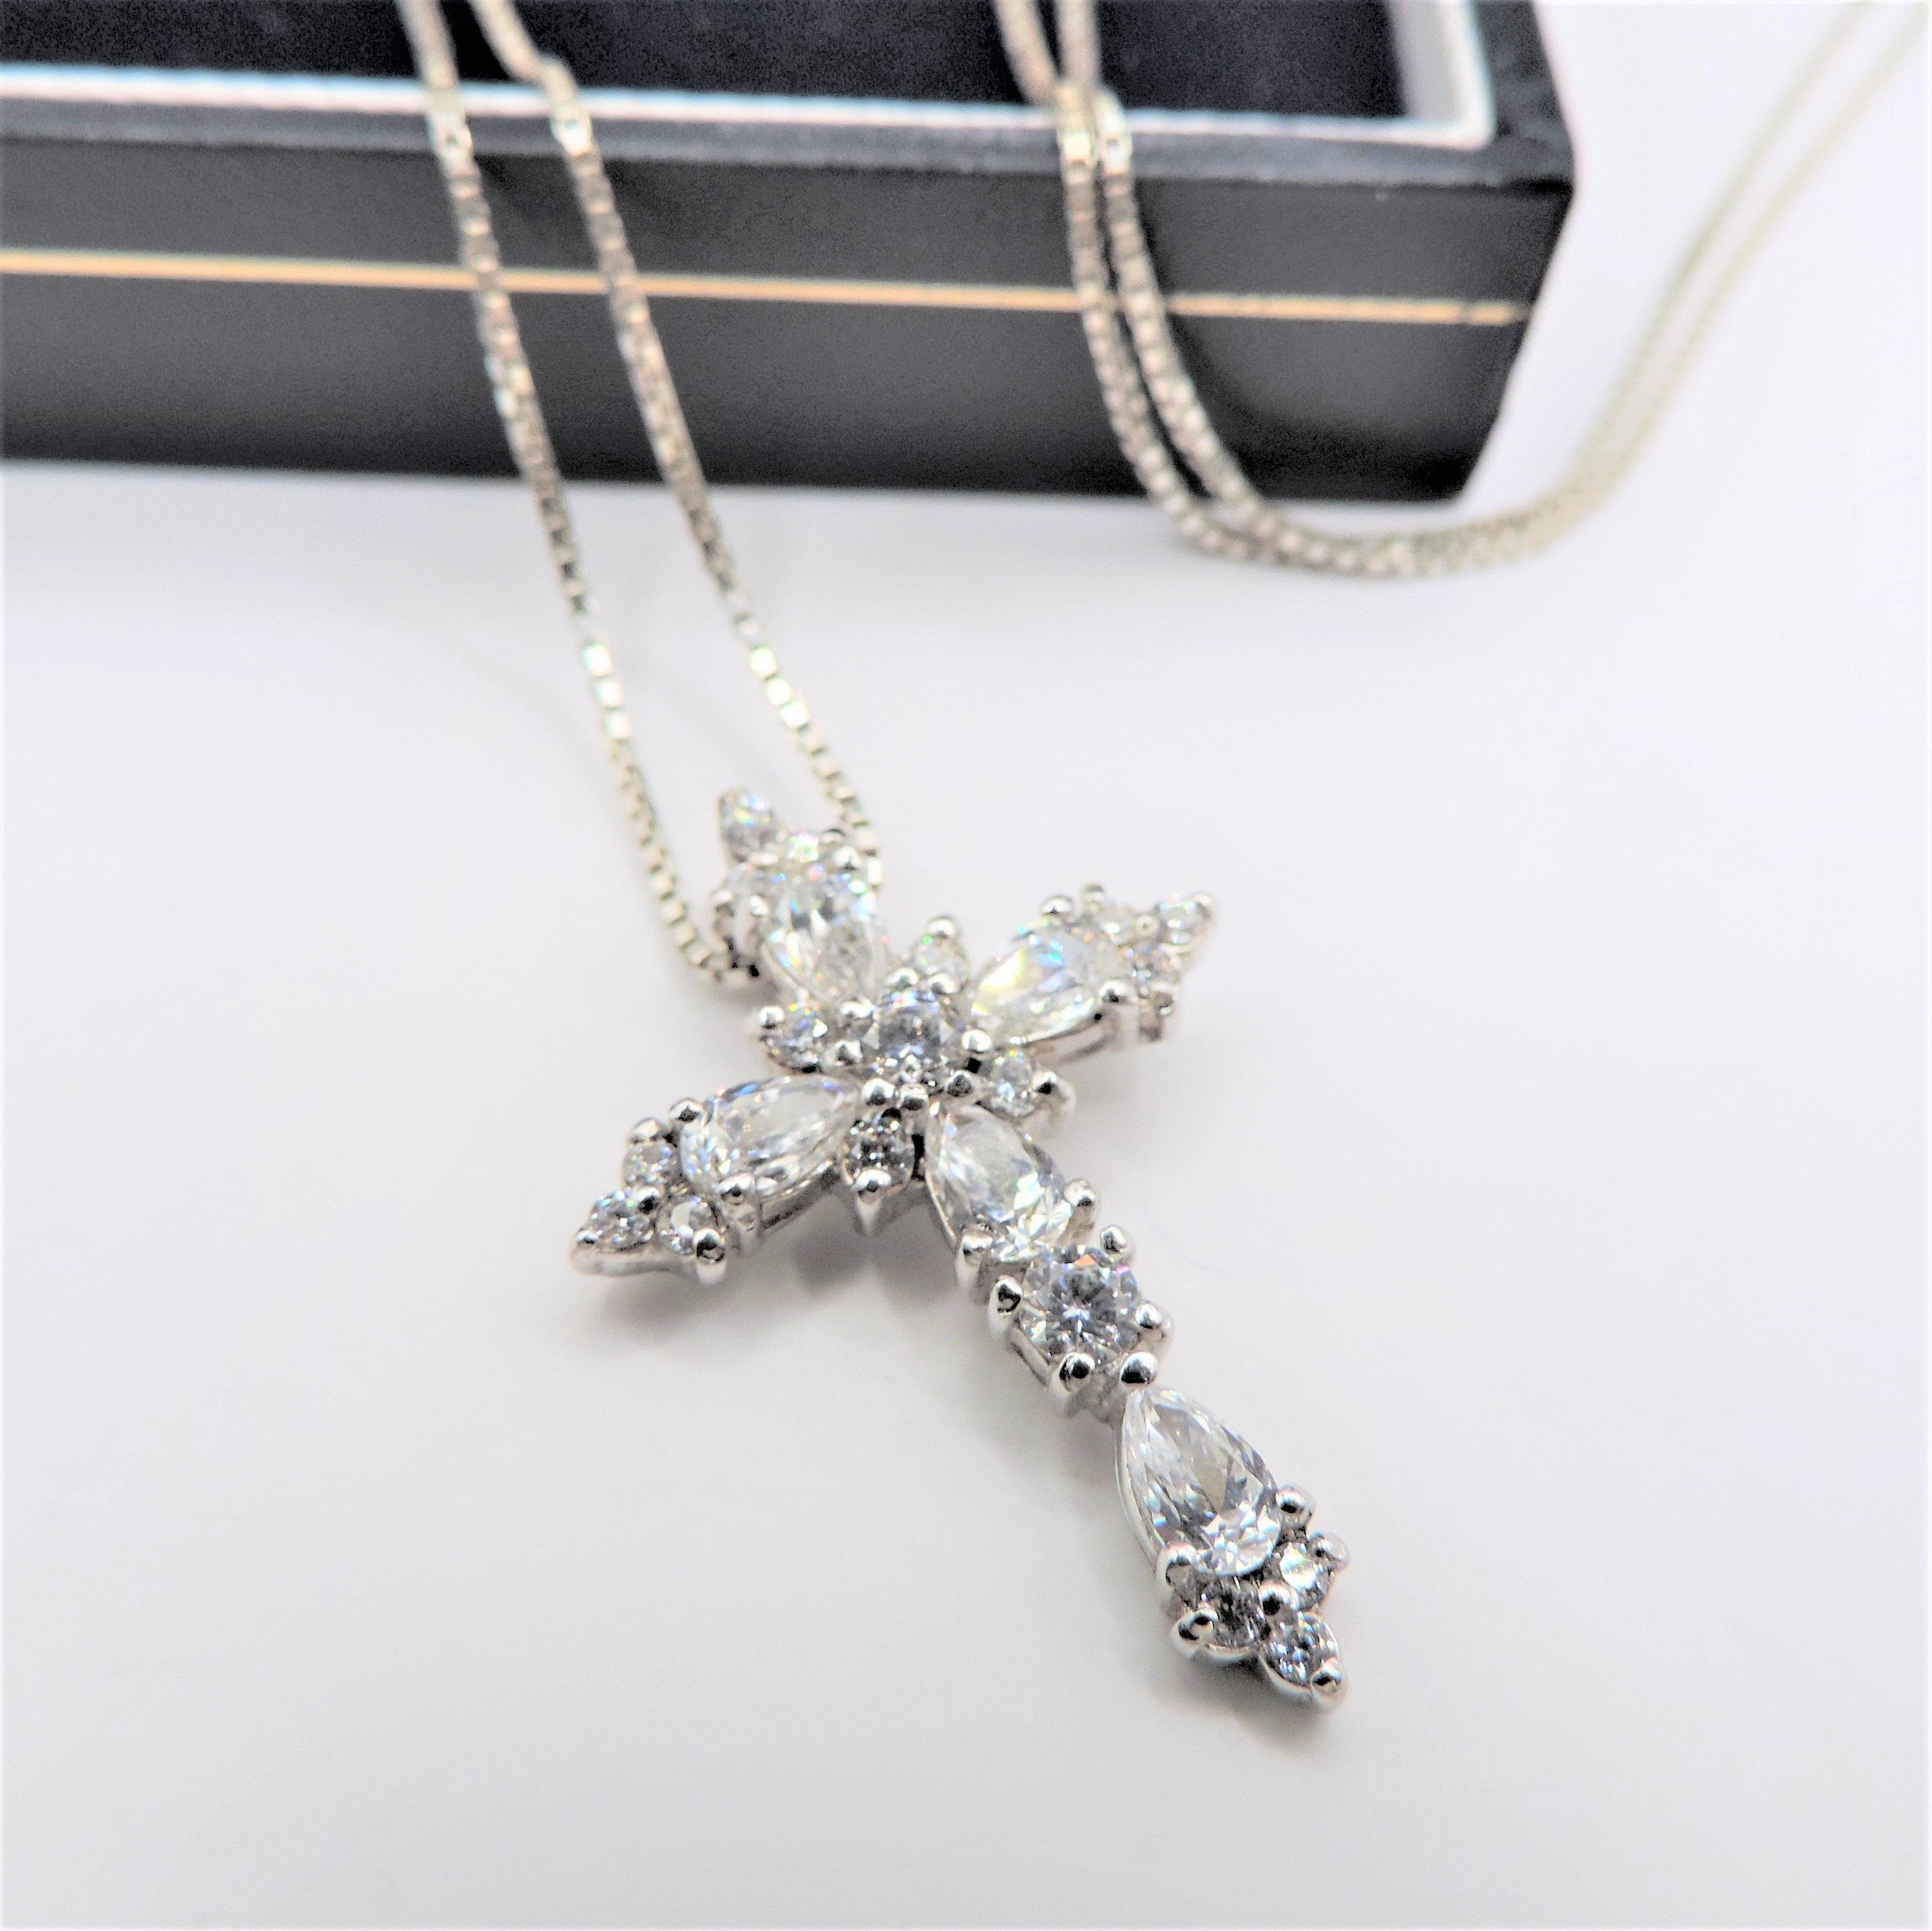 Sterling Silver Cubic Zirconia Cross Pendant Necklace New with Gift Pouch